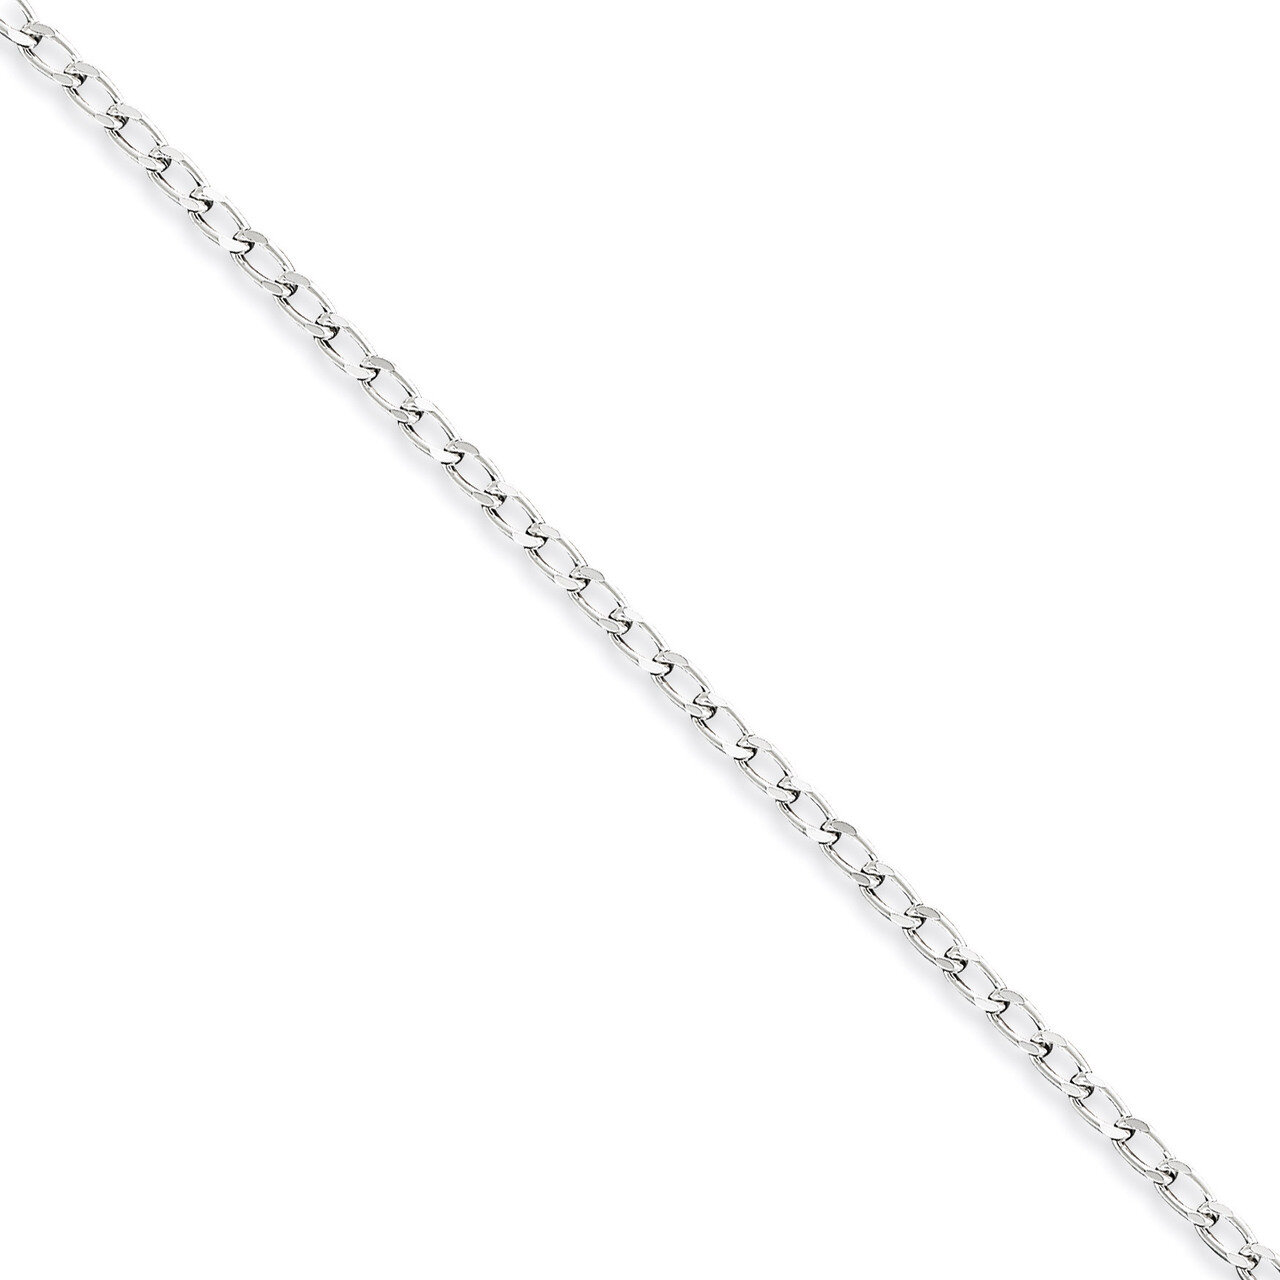 10 Inch 2.8mm Open Link Chain Sterling Silver QLL080-10